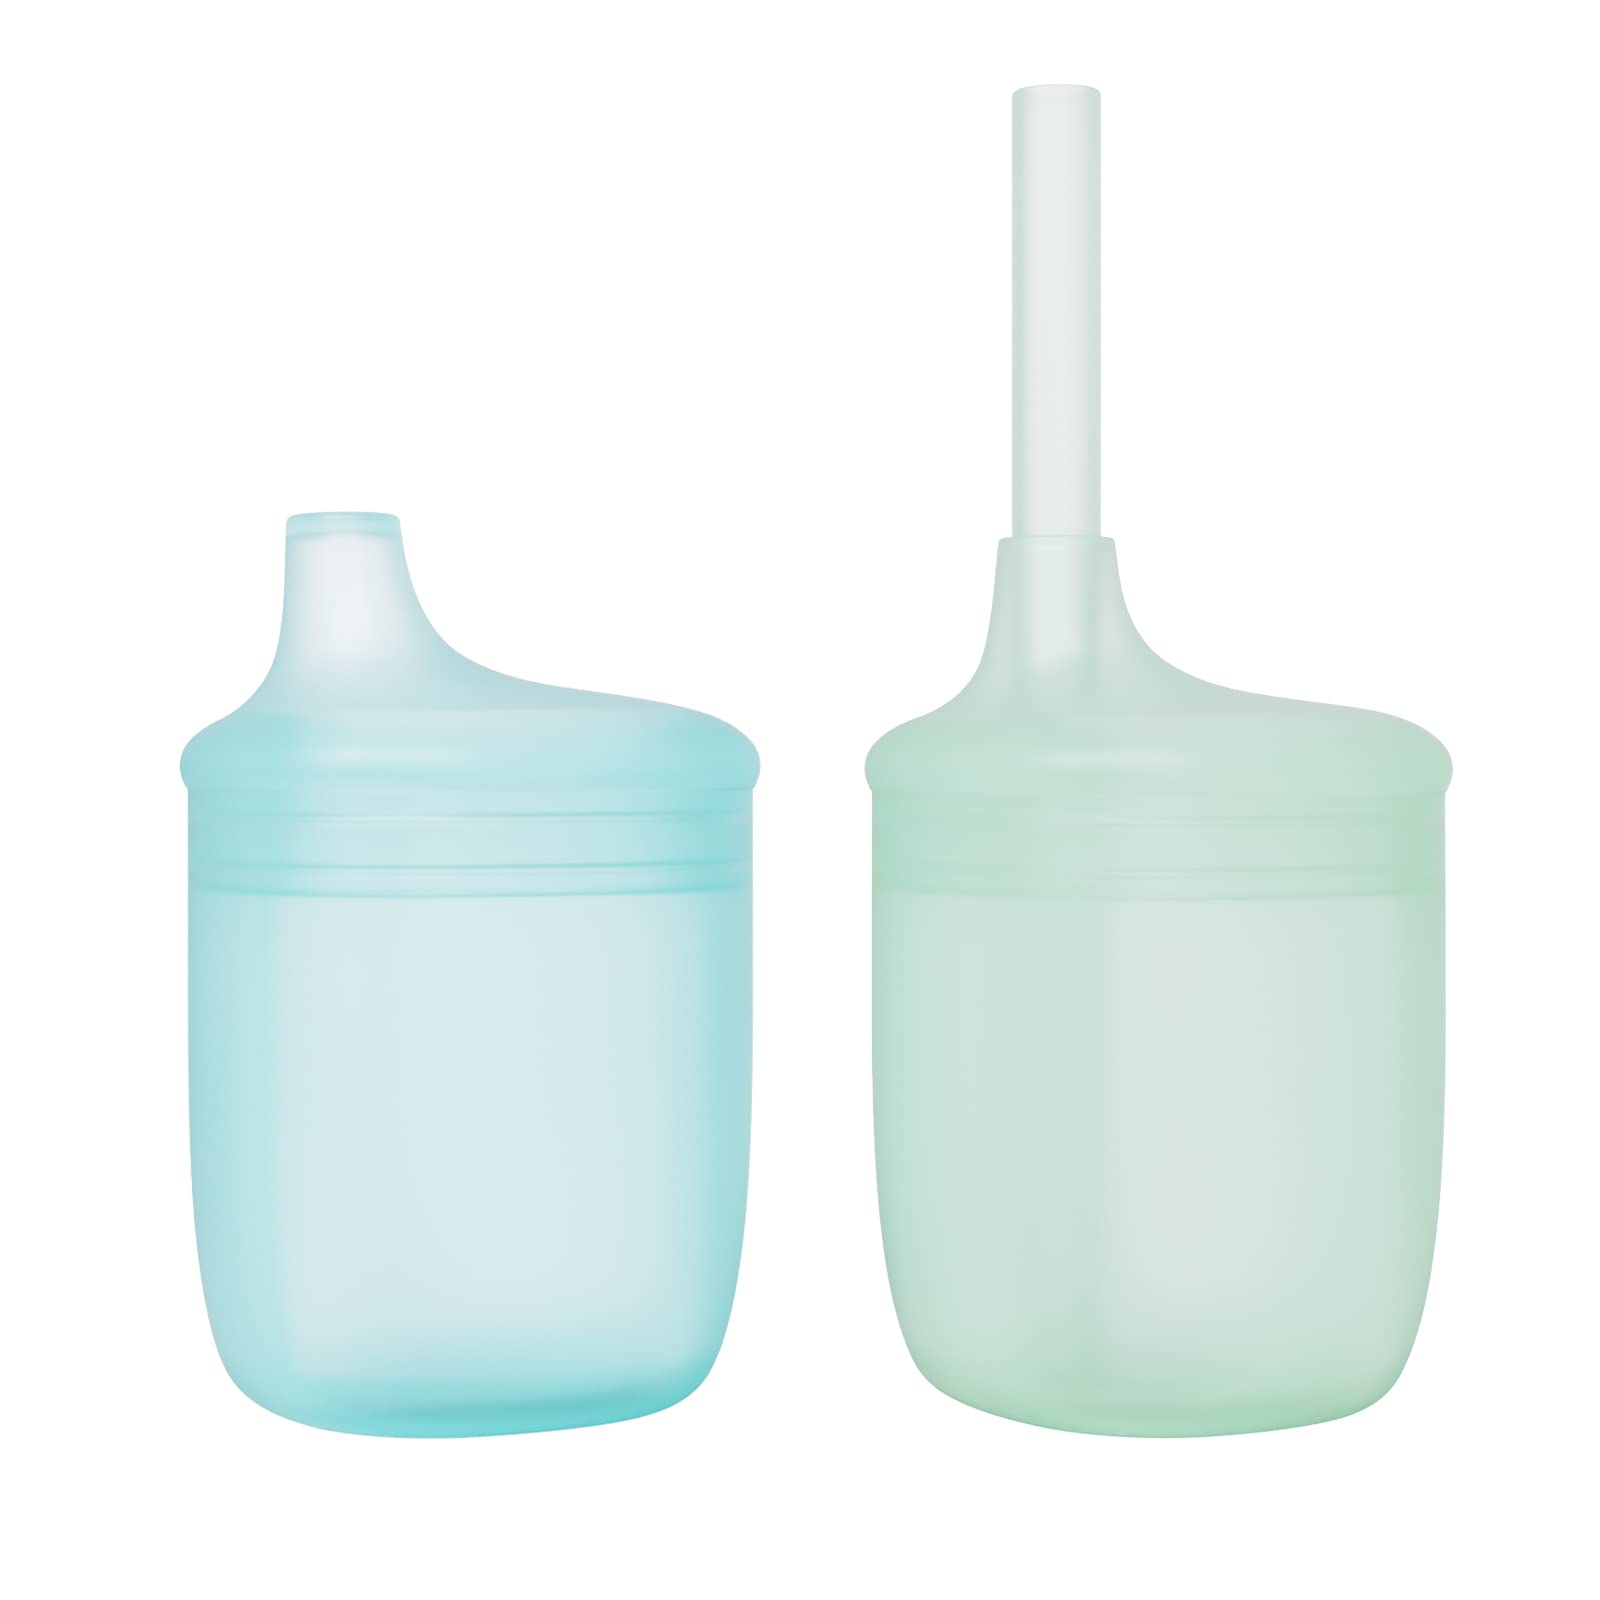 Mengdababy Straw Sippy Cup for Baby 6 Months+ Silicone Transition Cups for Toddler  Spill Proof See-thru Babies Cup 100% Food Grade with No Fillers BPA Free  Microwave Blue Green